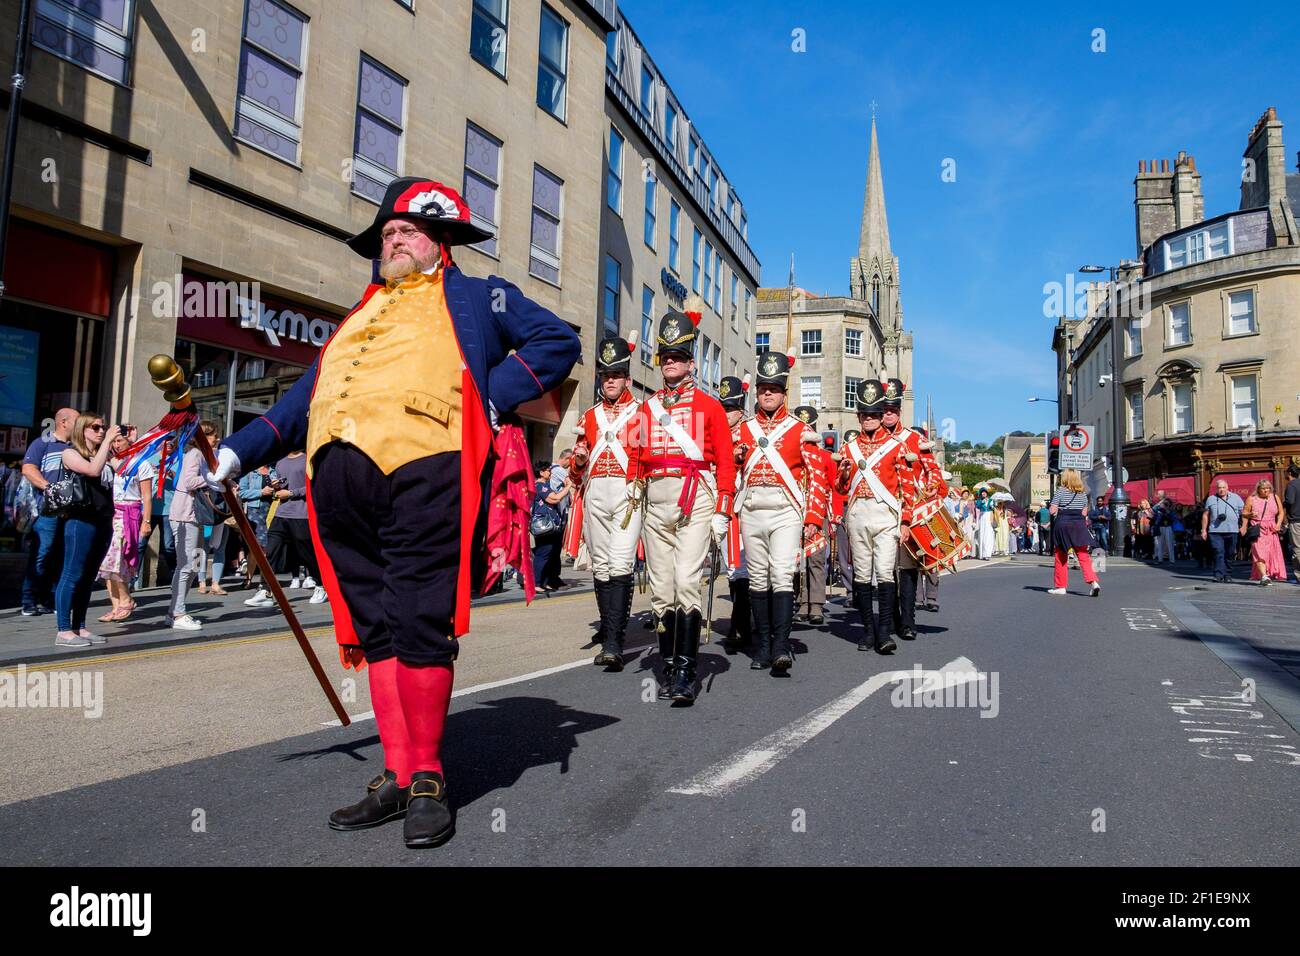 The re-enactment group,His Majesty's 33rd Regiment of Foot are pictured as they take part in the Jane Austen Grand Regency Costumed Promenade 14/09/19 Stock Photo